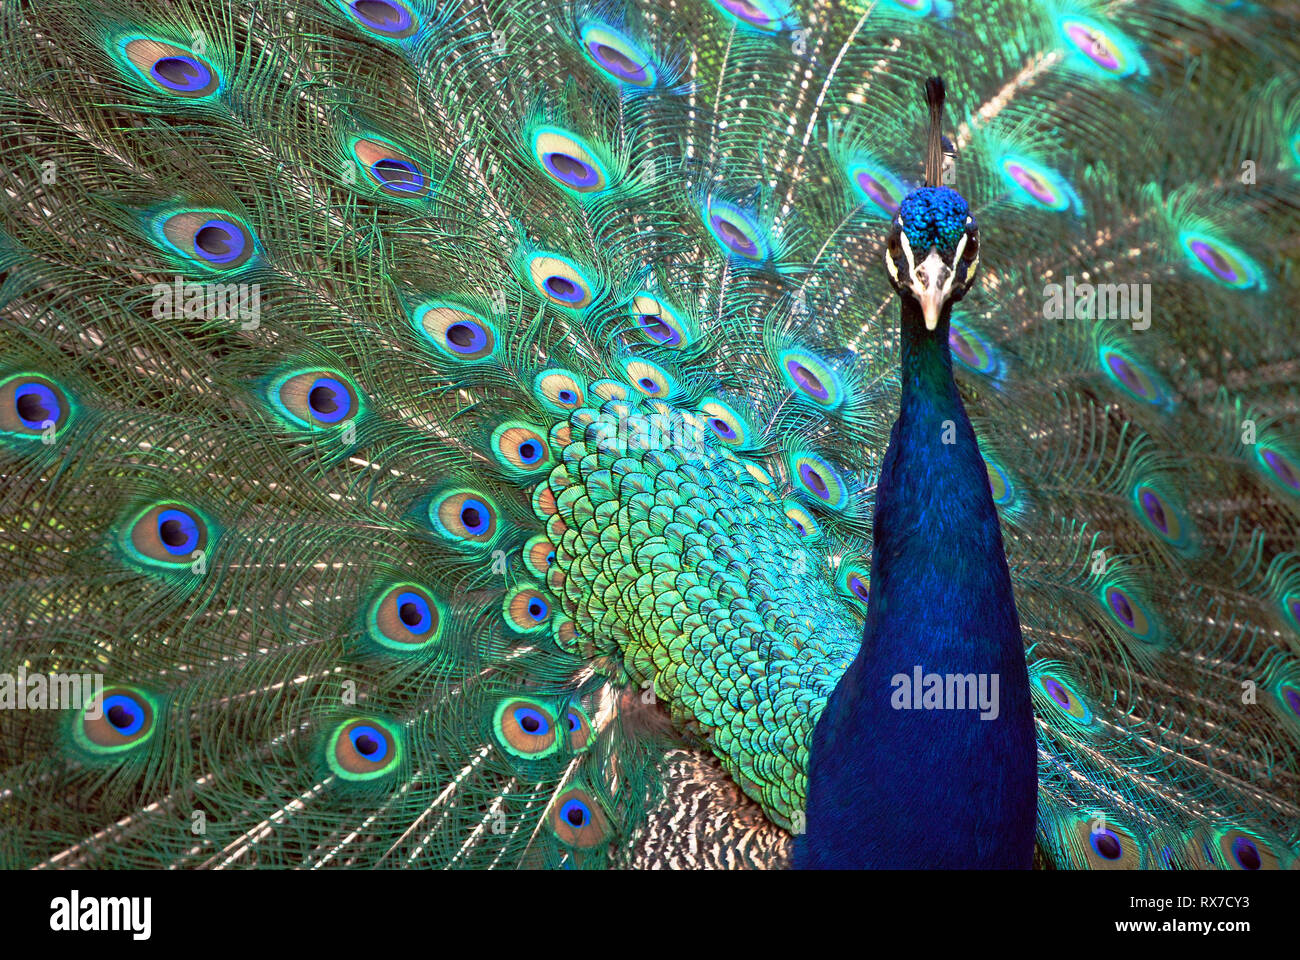 Peacock presenting its plumage, head on view looking into the lens Stock Photo